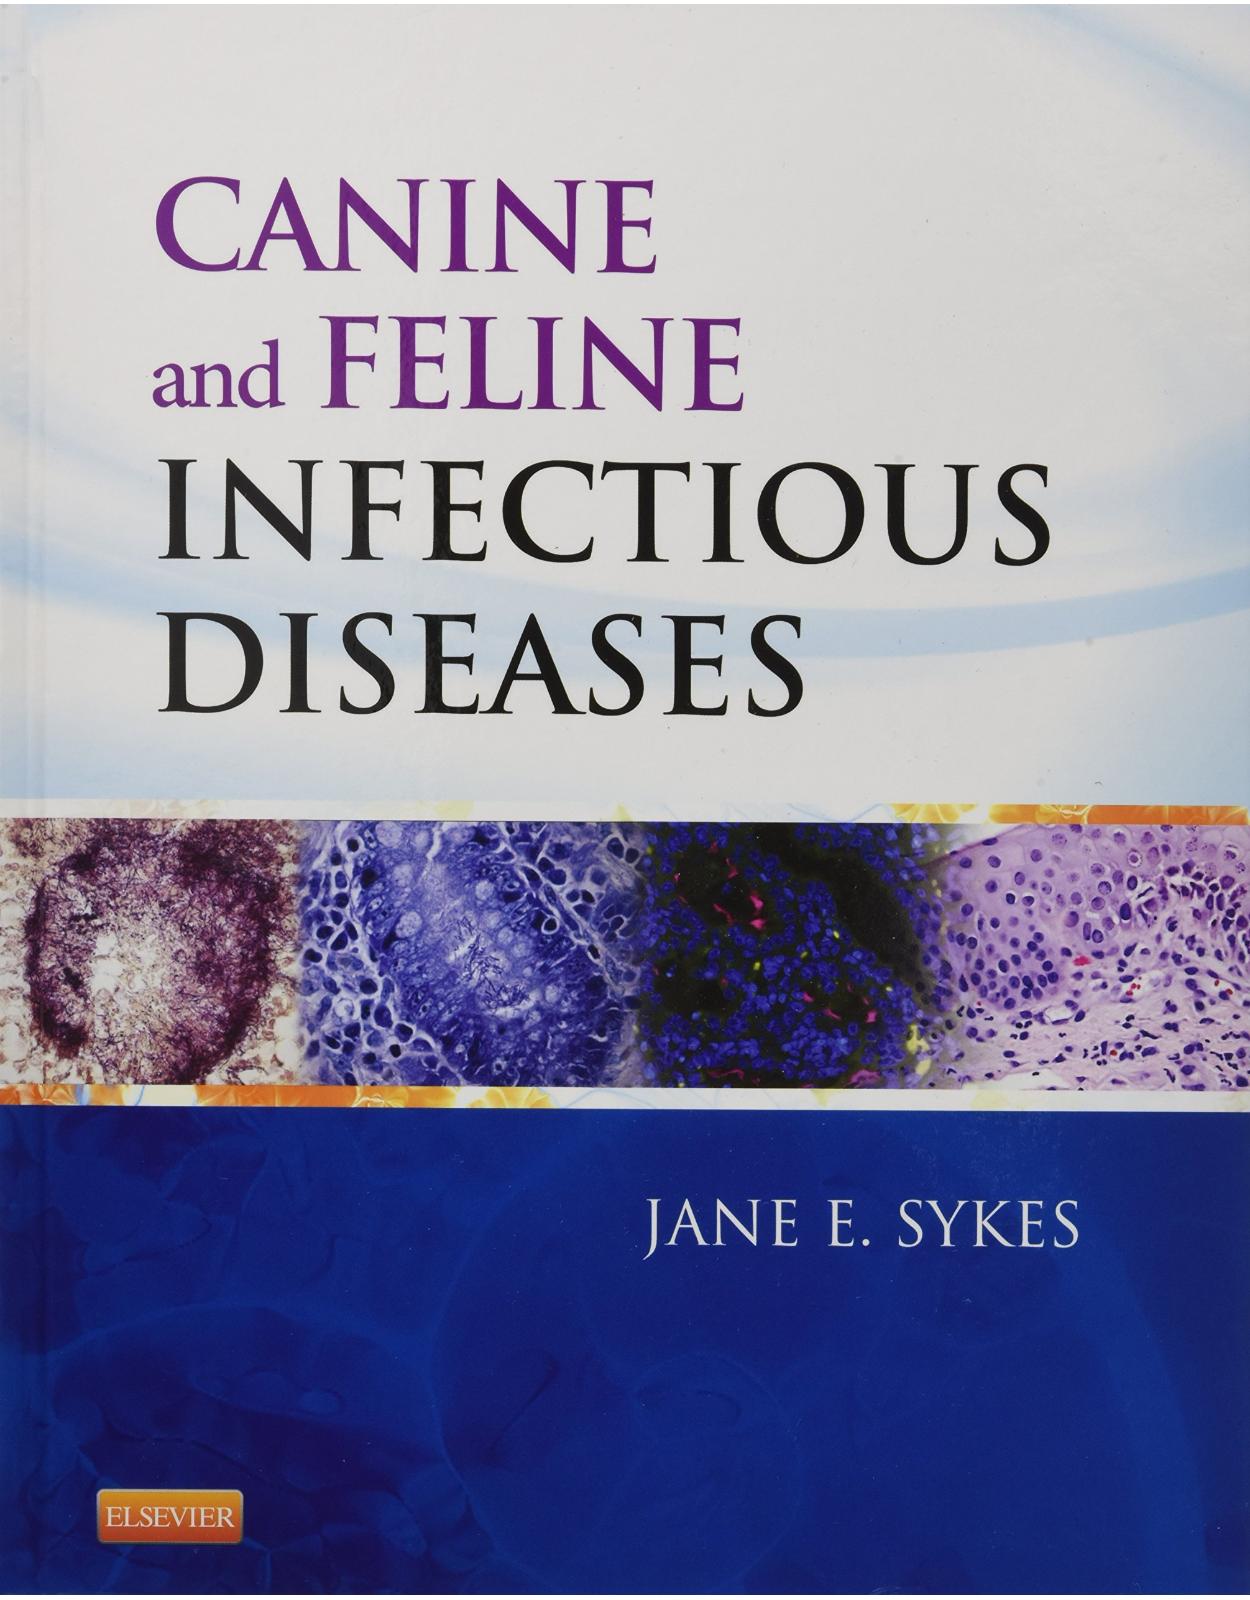 Canine and Feline Infectious Diseases, 1e